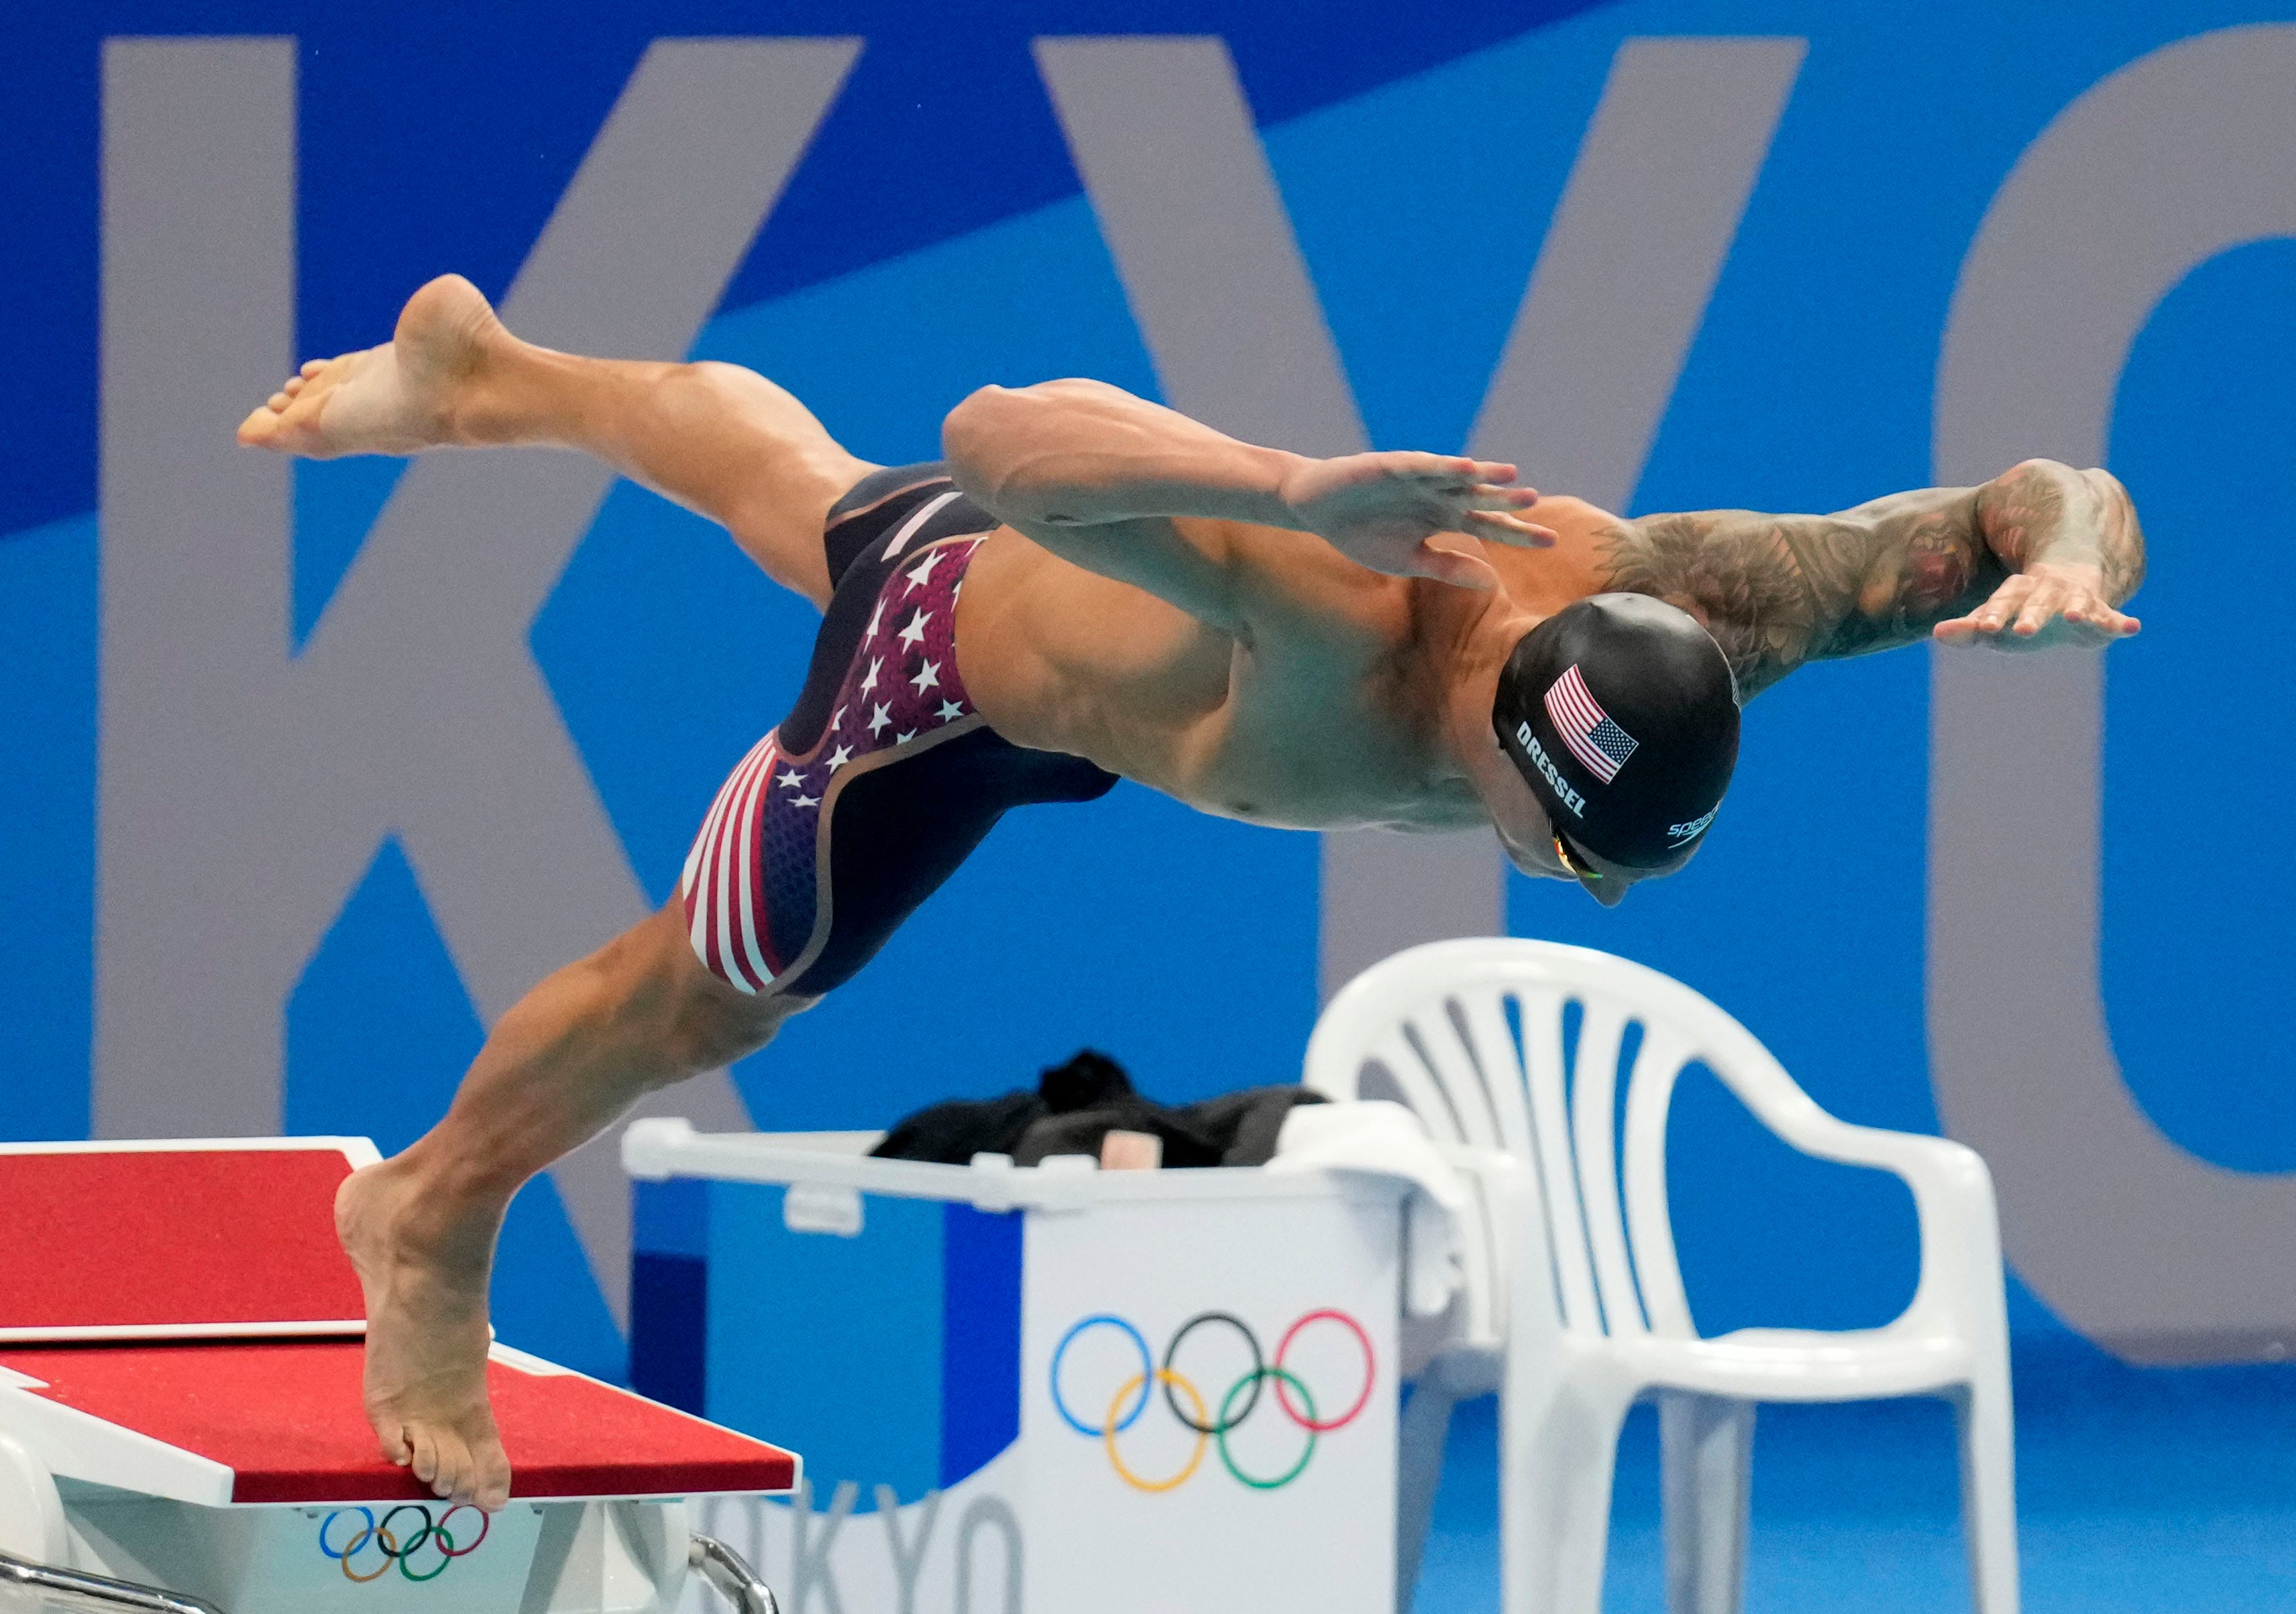 August 1, 2021: Caeleb Dressel (USA) dives into the water at the start of the men's 50m freestyle final during the Tokyo 2020 Olympic Summer Games at Tokyo Aquatics Centre.